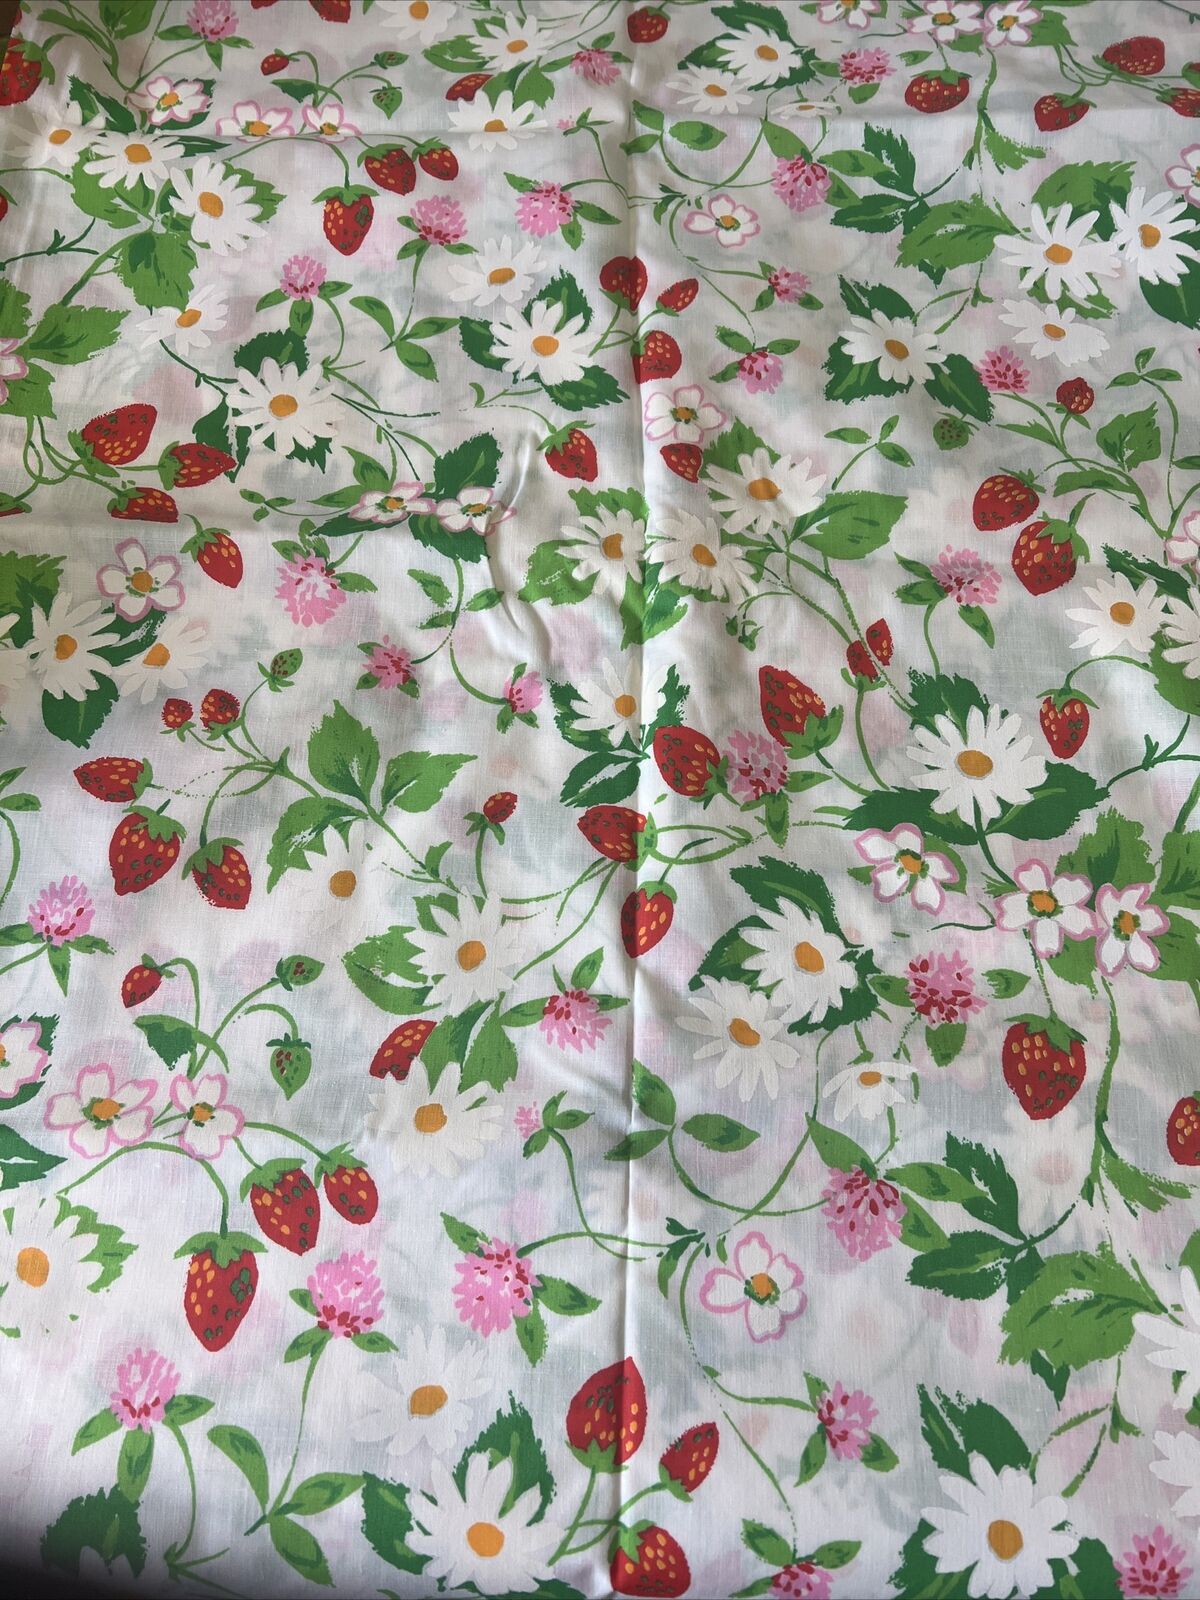 Vintage Strawberries Floral Cotton Fabric 45” 3+ Yards Daisies